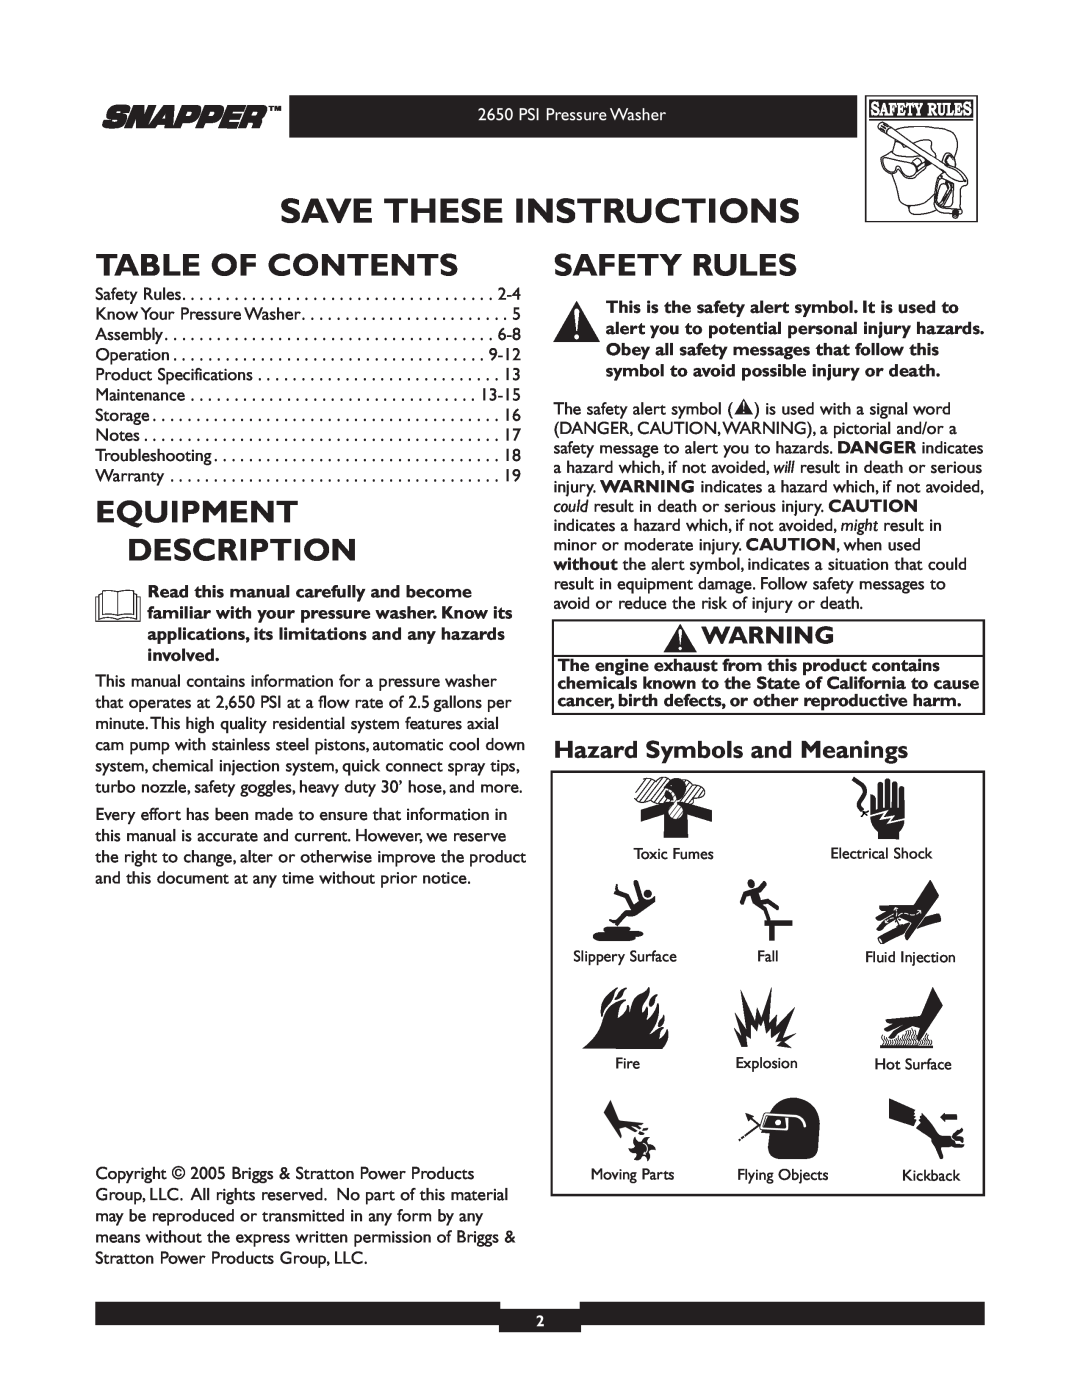 Snapper 020230 user manual Table Of Contents, Equipment Description, Safety Rules, Hazard Symbols and Meanings 